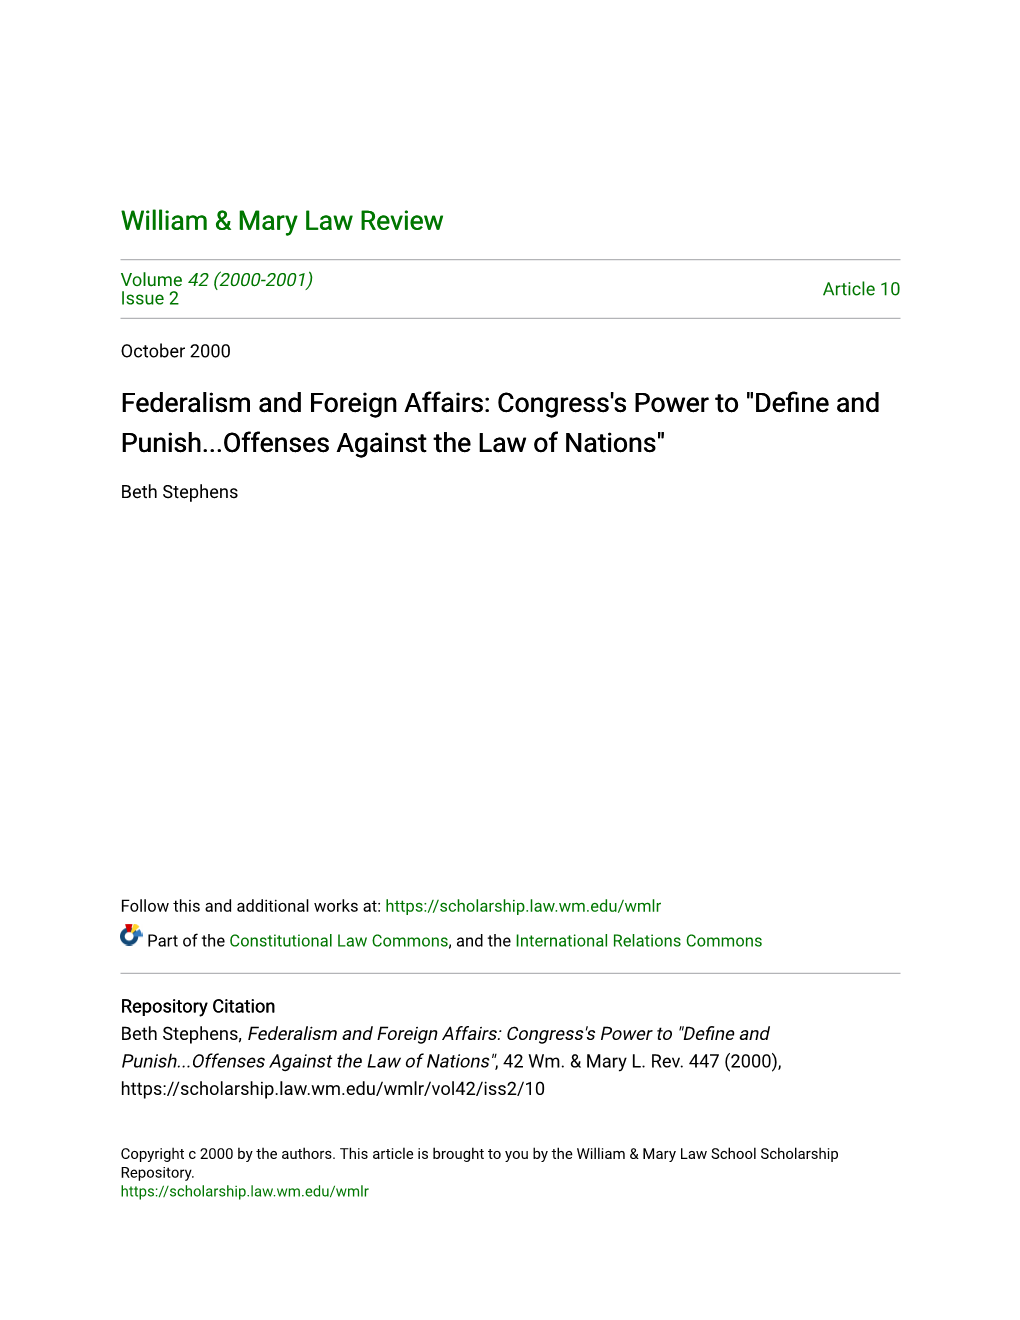 Federalism and Foreign Affairs: Congress's Power to "Define and Punish...Offenses Against the Law of Nations"